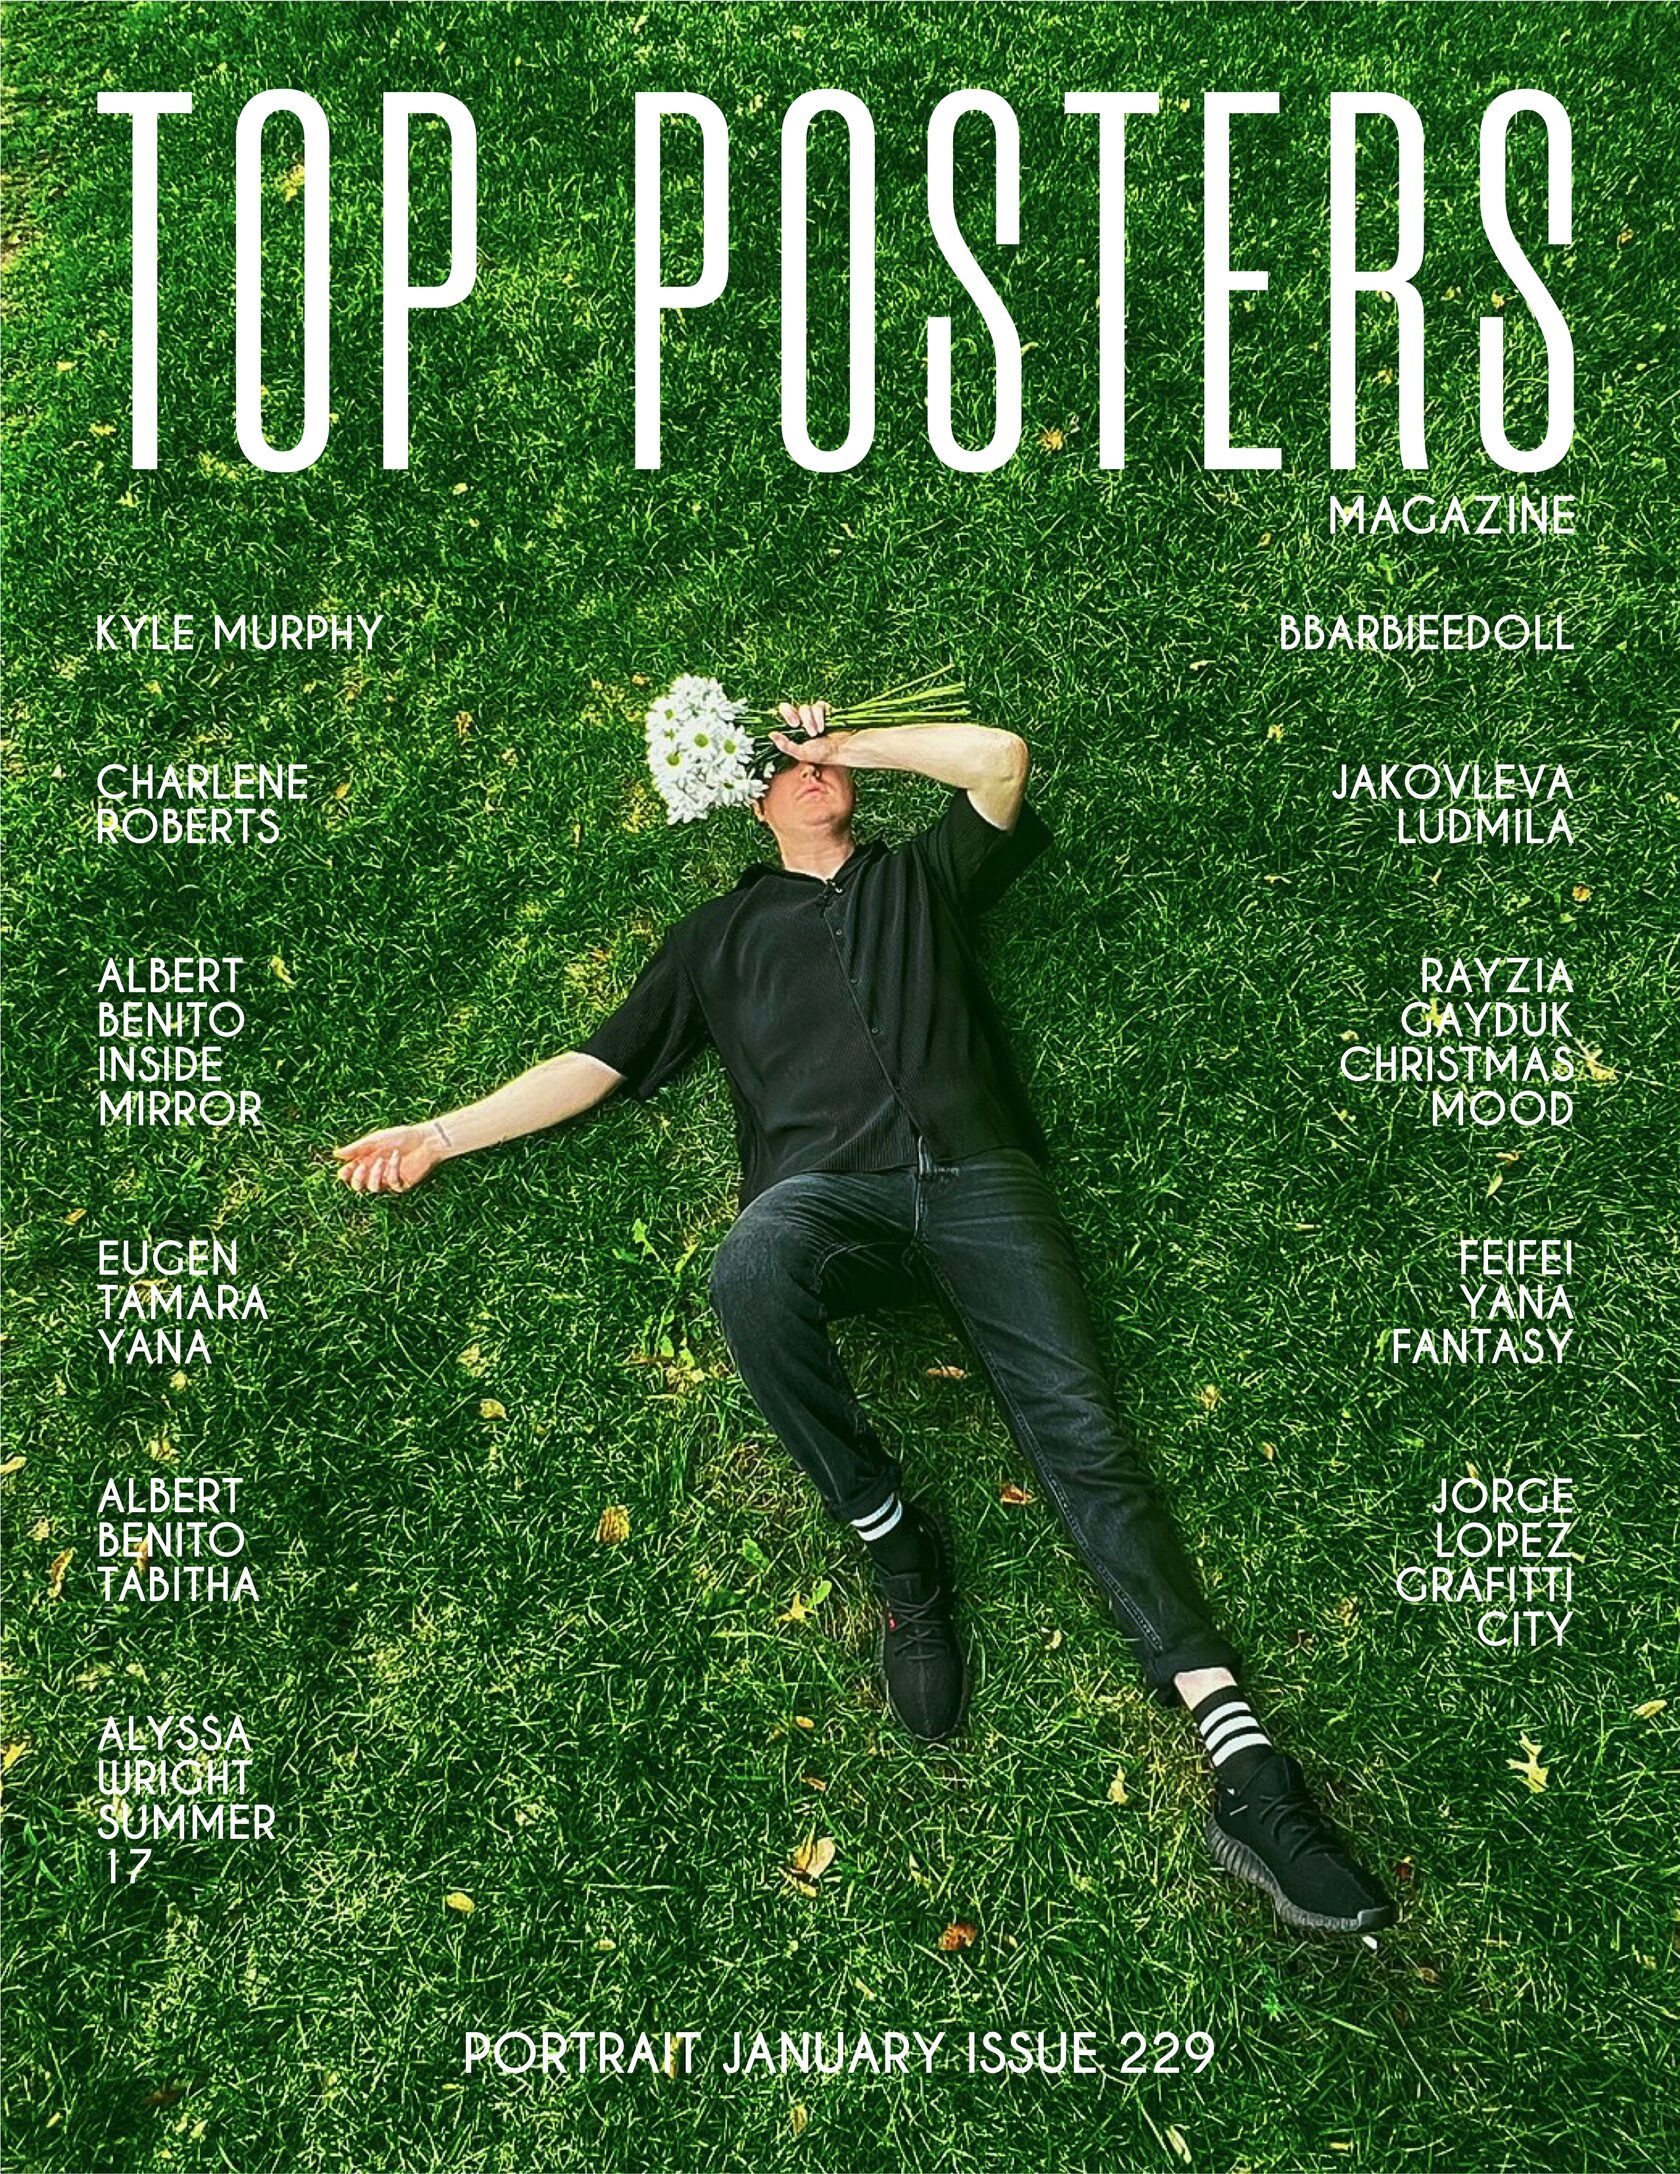 BE RANKED IN TOP POSTERS MAGAZINE